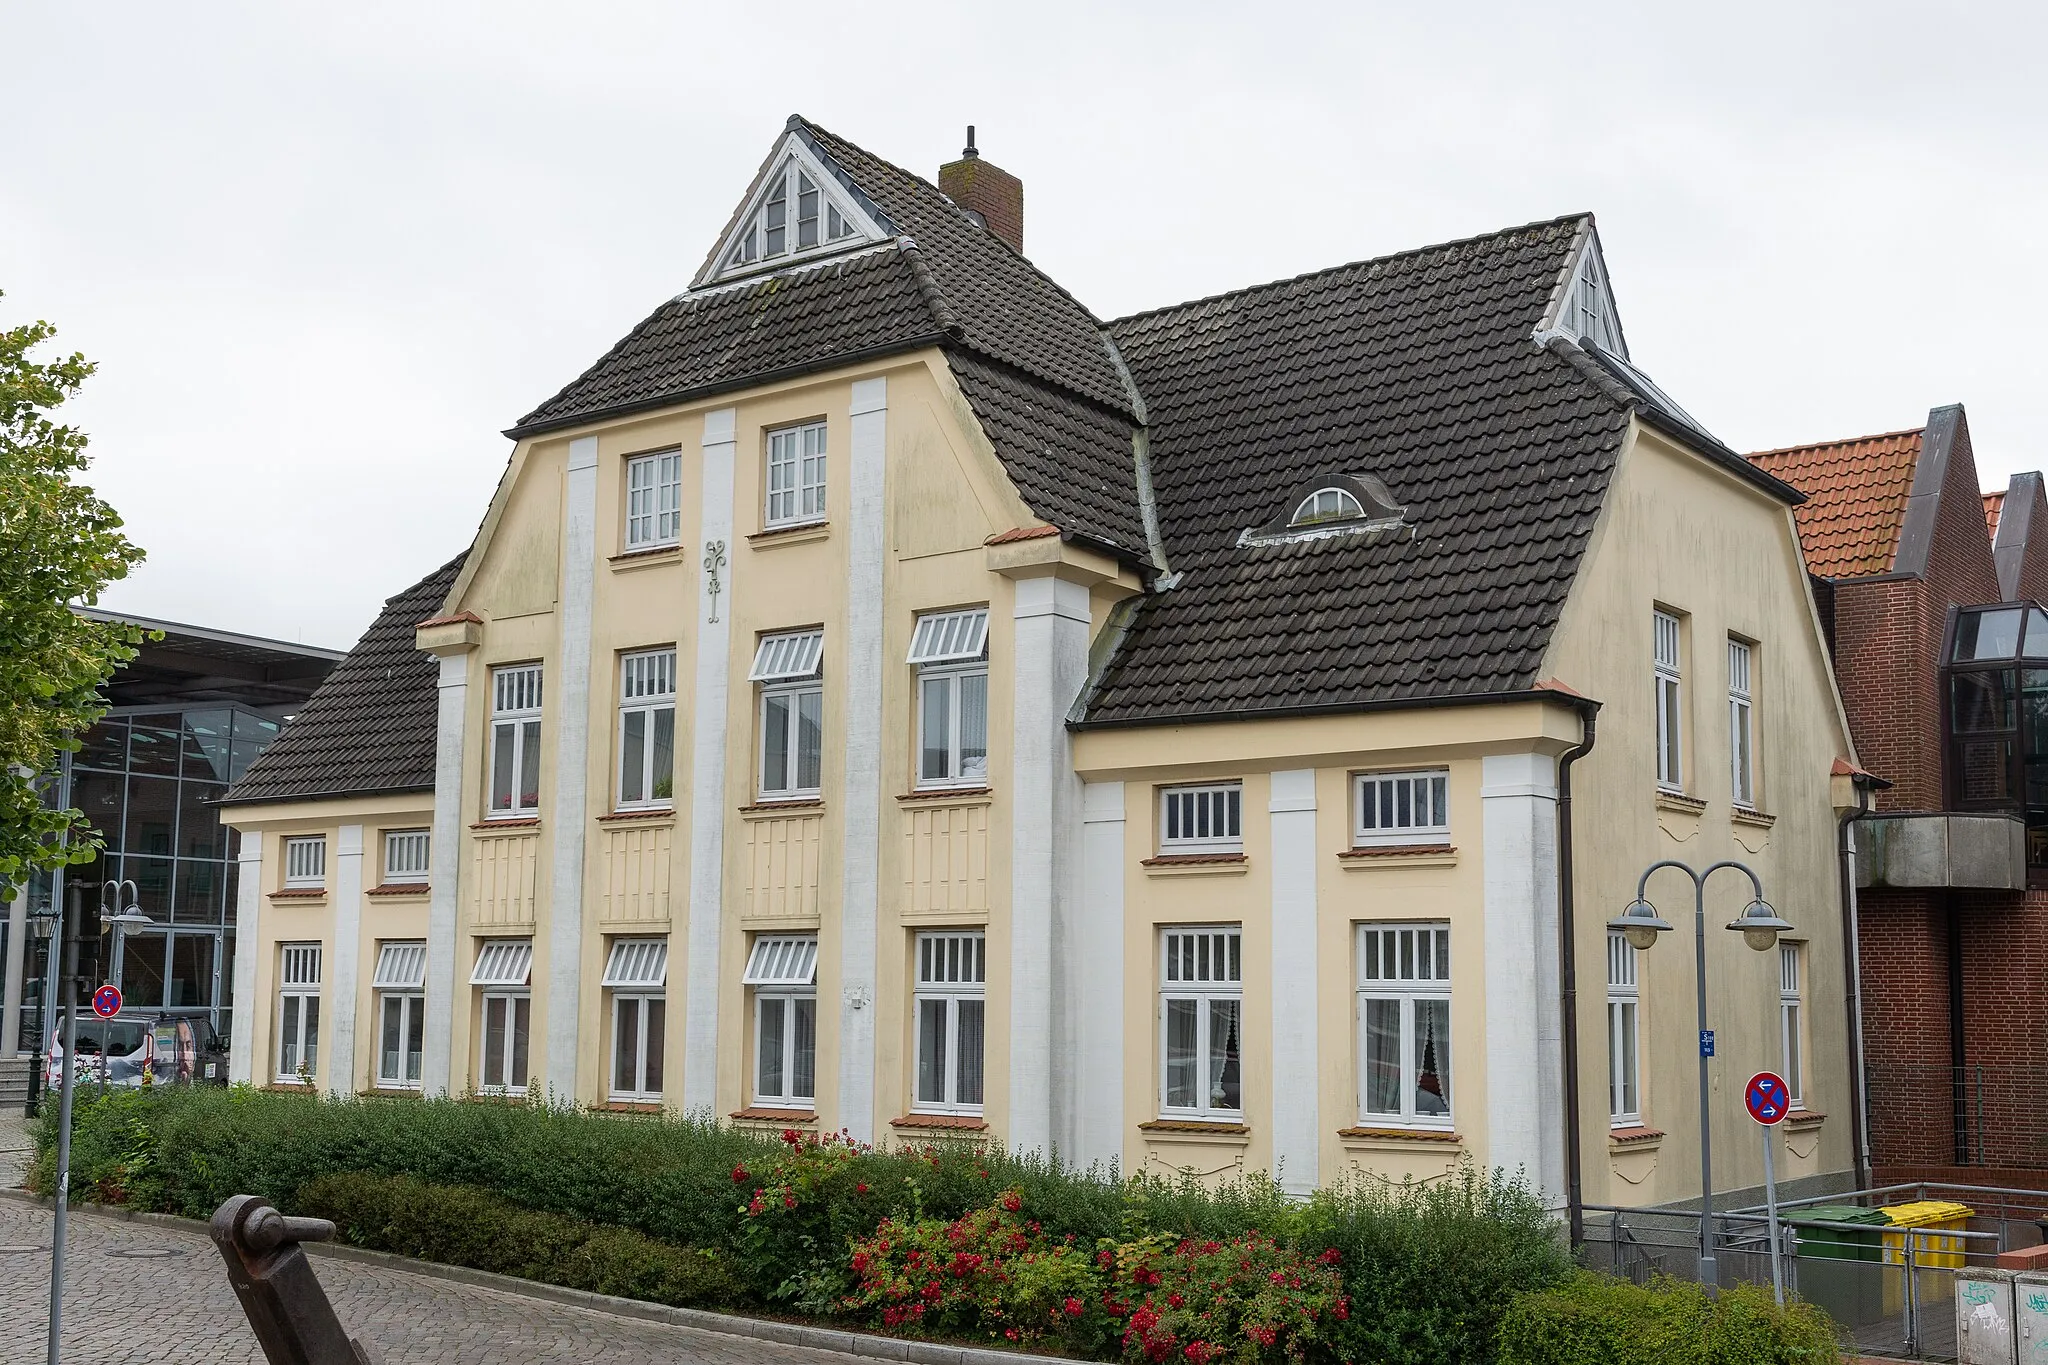 Photo showing: Former administrative Building in Husum, Germany, built from 1902 to 1908.